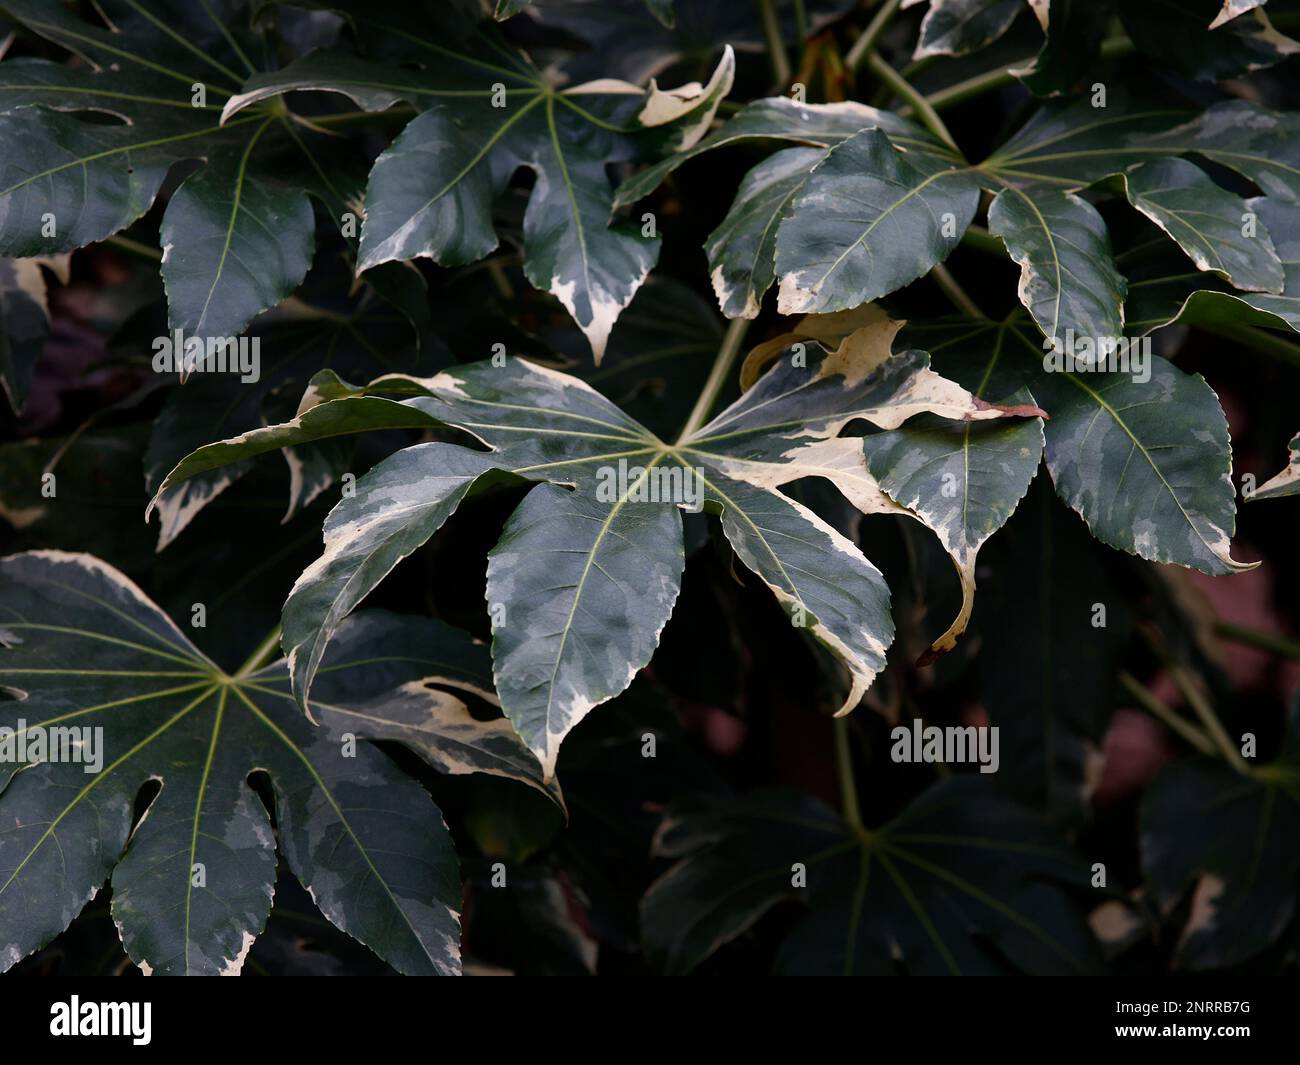 Closeup of the white and green variegated leaves of the evergreen garden shrub Fatsia japonica variegata. Stock Photo